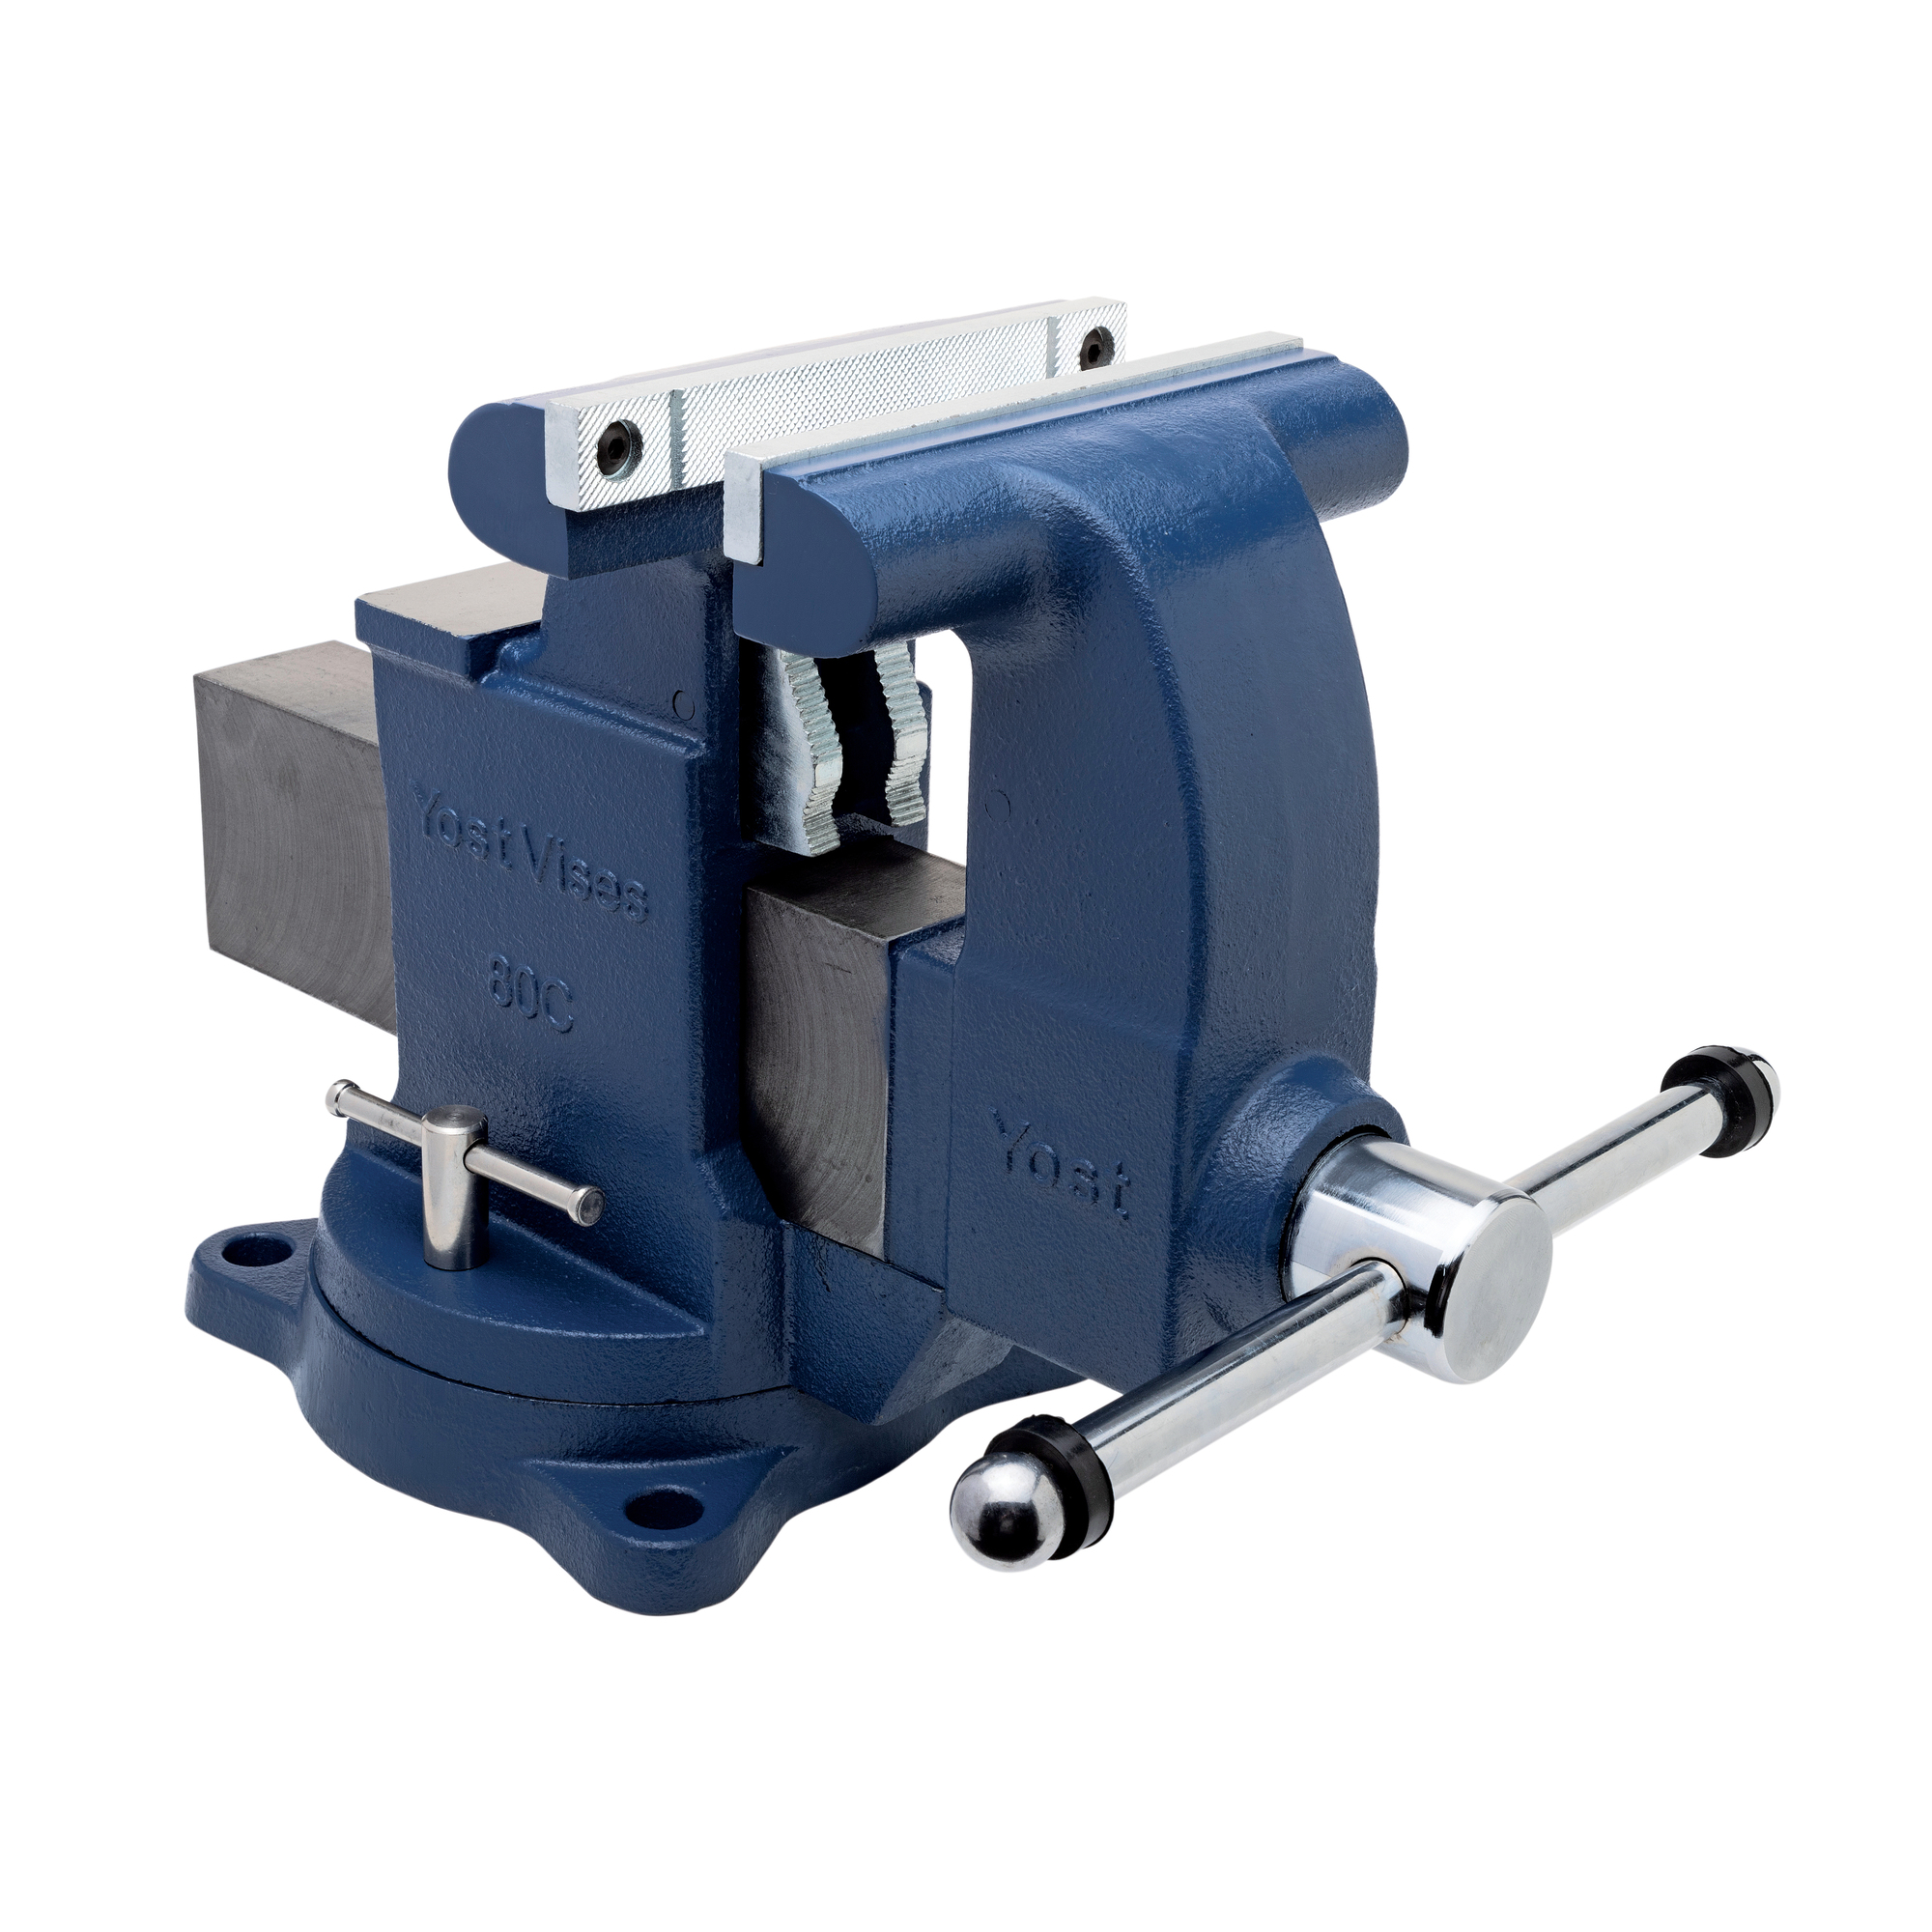 Yost Vises, 8Inch Tradesman Combo Vise, Jaw Width 8 in, Jaw Capacity 7.5 in, Material Ductile Iron, Model 80C